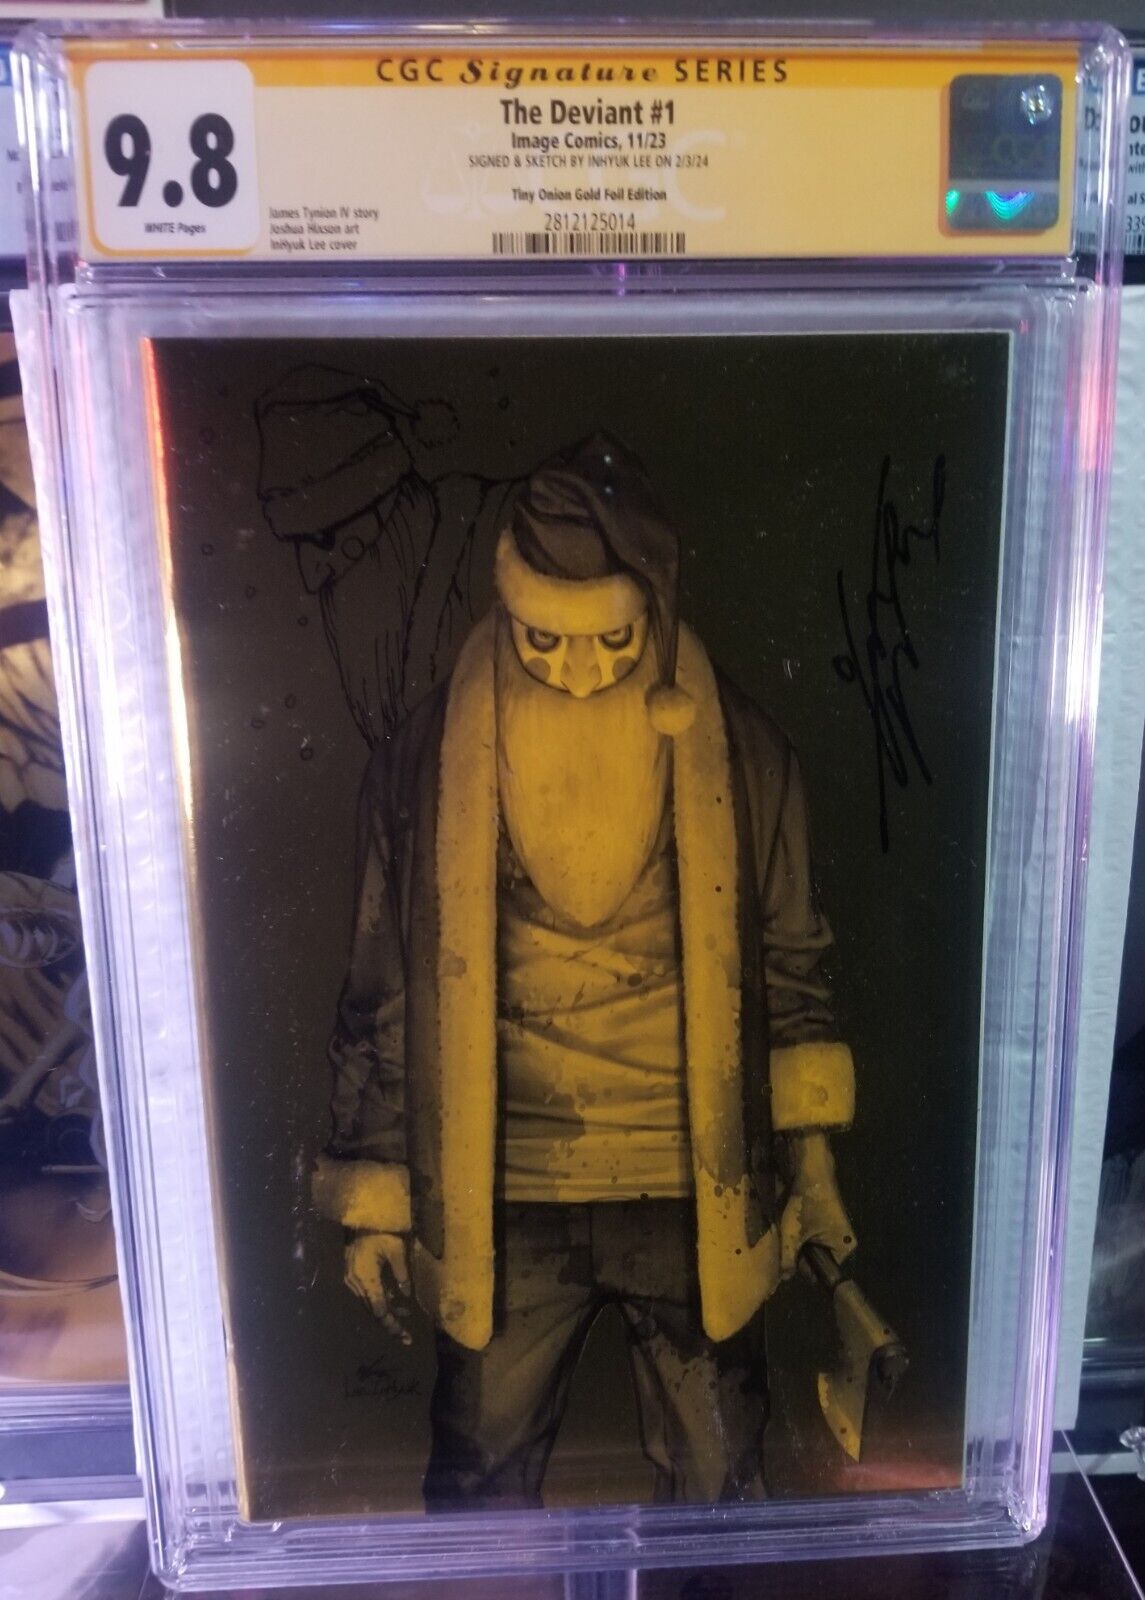 The Deviant #1 - CGC 9.8 - SS & Sketch - Inhyuk Lee - Gold Foil Edition